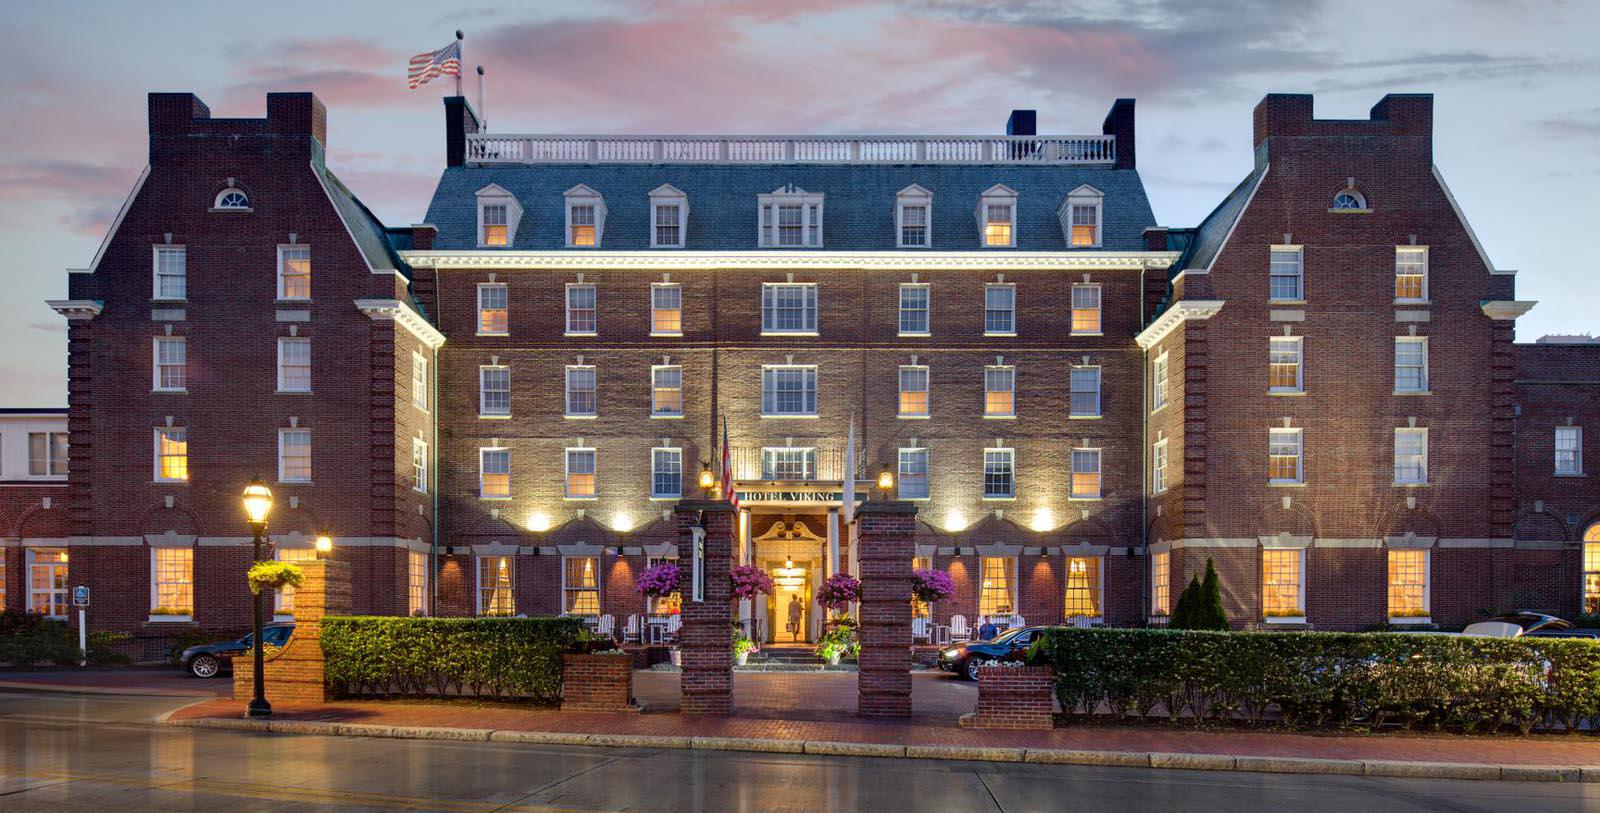 Image of Entrance The Hotel Viking, 1926, Member of Historic Hotels of America, in Newport, Rhode Island, Special Offers, Discounted Rates, Families, Romantic Escape, Honeymoons, Anniversaries, Reunions